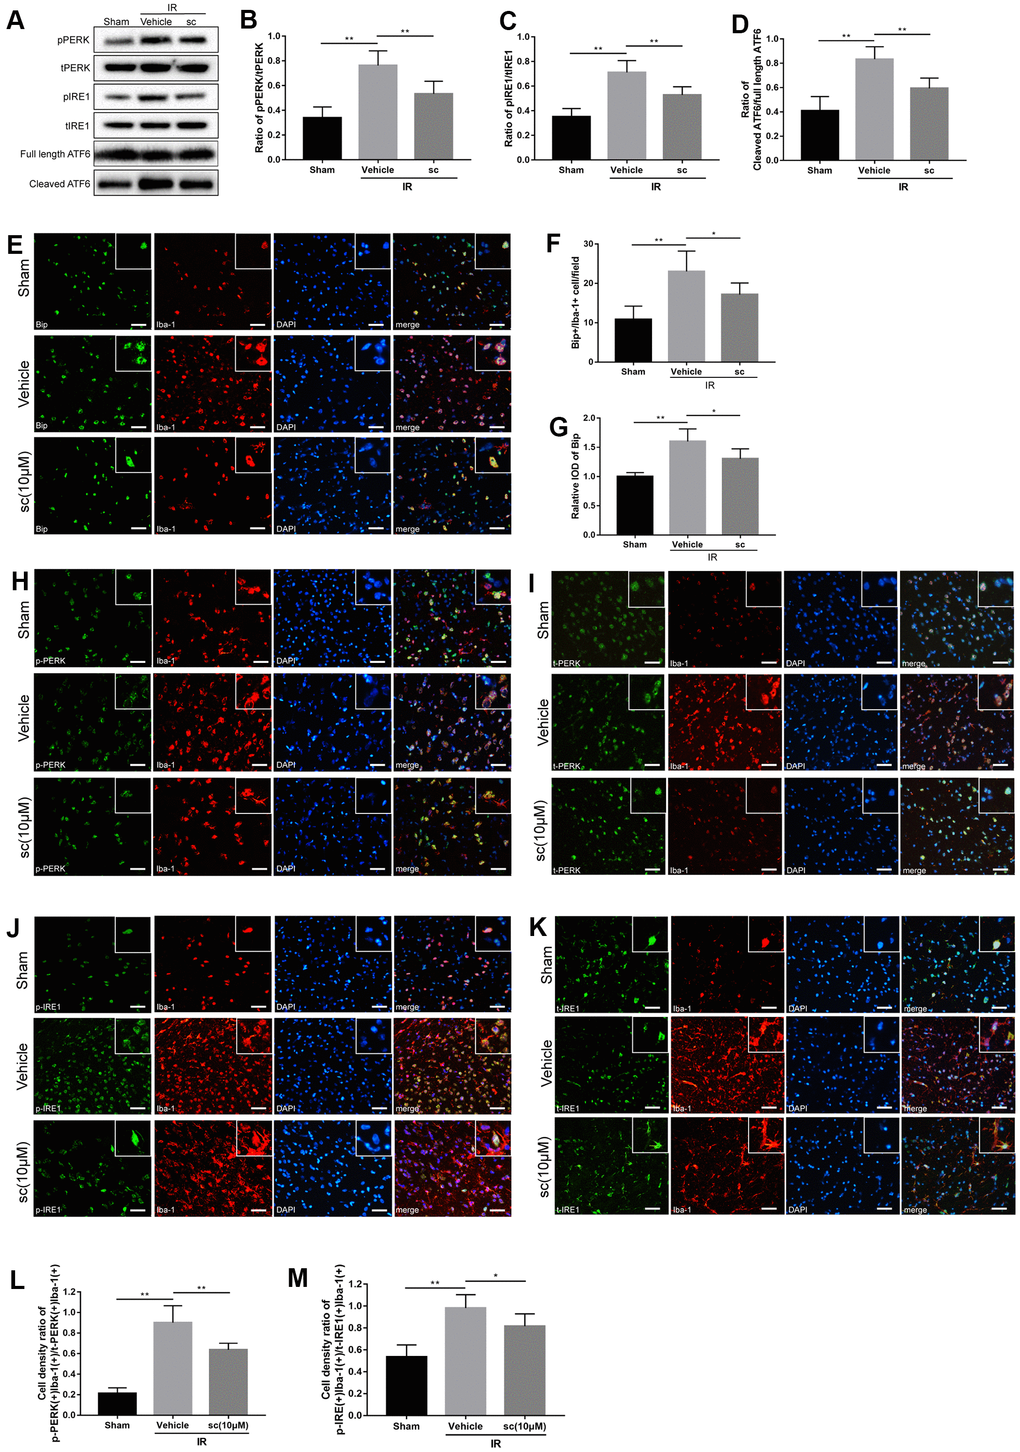 Microglial endoplasmic reticulum (ER) stress was mitigated by PTP1B inhibitor treatment after cerebral ischemia/reperfusion (IR) injury in rats. (A) Western blot to detect the effect of PTP1B inhibitor (10 μM) on phospho-PERK, total-PERK, phospho-IRE1, total-IRE1, cleaved ATF6, and full length ATF6 protein expression in the rat ipsilateral cortex 24 h after IR injury (n = 5 per group). (B–D) Quantitative analysis of band density ratio of phosphor-PERK/total-PERK, phospho-IRE1/total-IRE1, and cleaved ATF6/full length ATF6. Results are presented as the mean ± SEM (n = 4 per group). (E) Double immunofluorescence to detect Bip expression in microglia (Iba-1) 24 h after IR injury. Scale bar = 50 μm. (F, G) Quantitative analysis of Bip+/Iba-1+ cell density and relative integrated optical density (IOD) of Bip in the ipsilateral cerebral cortex (presented as the mean ± SEM, n = 5 per group). (H–K) Double immunofluorescence to detect phospho-PERK, PERK, phospho-IRE1, and IRE1 expression in microglia (Iba-1) 24 h after IR injury. Scale bar = 50 μm. (L, M) Quantitative analysis of double-positive cell density ratio of p-PERK(+)Iba-1(+)/PERK(+)/Iba-1(+) and p-IRE1(+)Iba-1(+)/IRE1(+)Iba-1(+) in the ipsilateral cerebral cortex (presented as the mean ± SEM, n = 6 per group). *p p p 